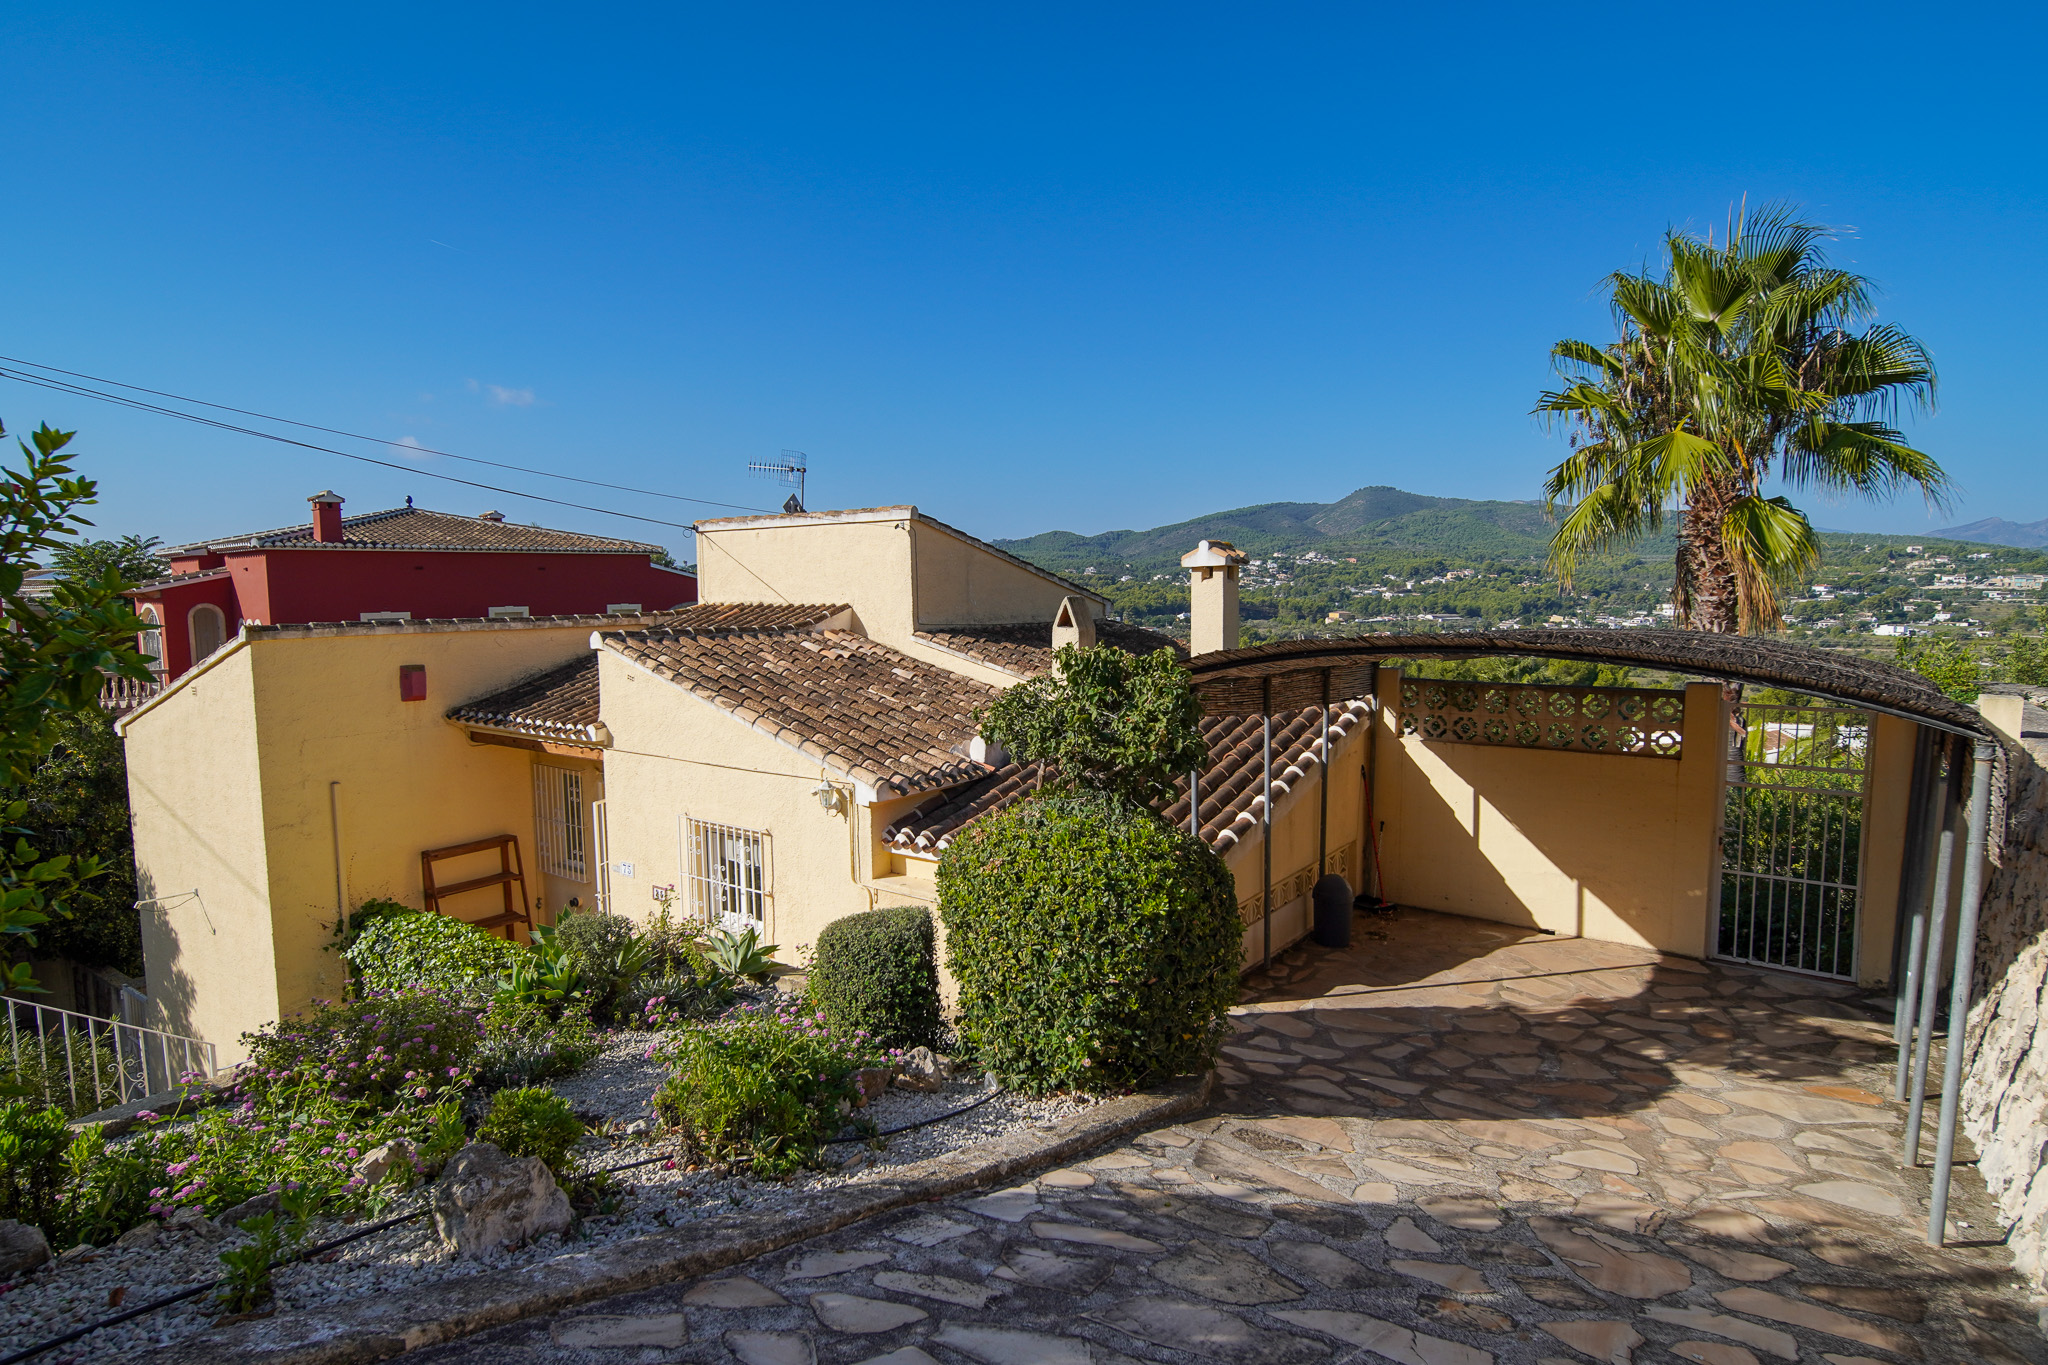 Four Bedroom Villa With Views For Sale